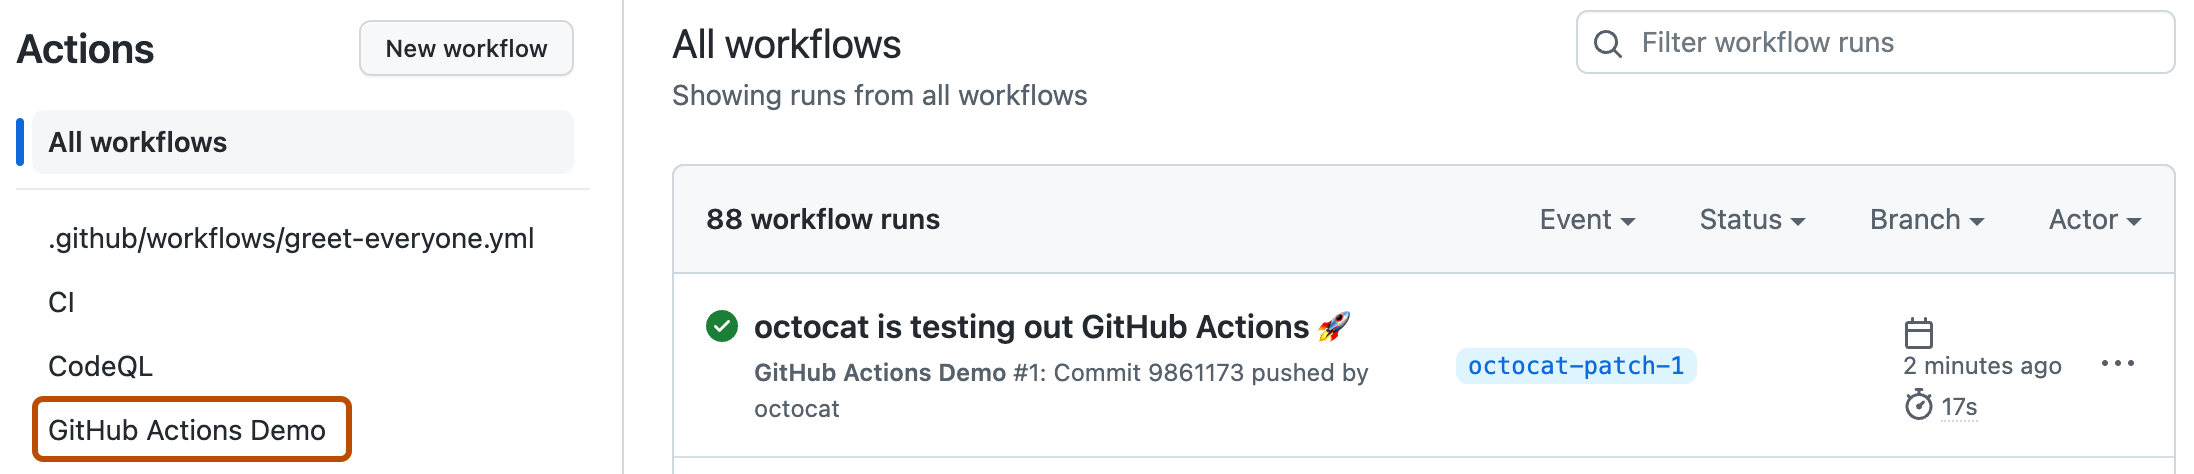 Screenshot of the "Actions" page. The name of the example workflow, "GitHub Actions Demo", is highlighted by a dark orange outline.